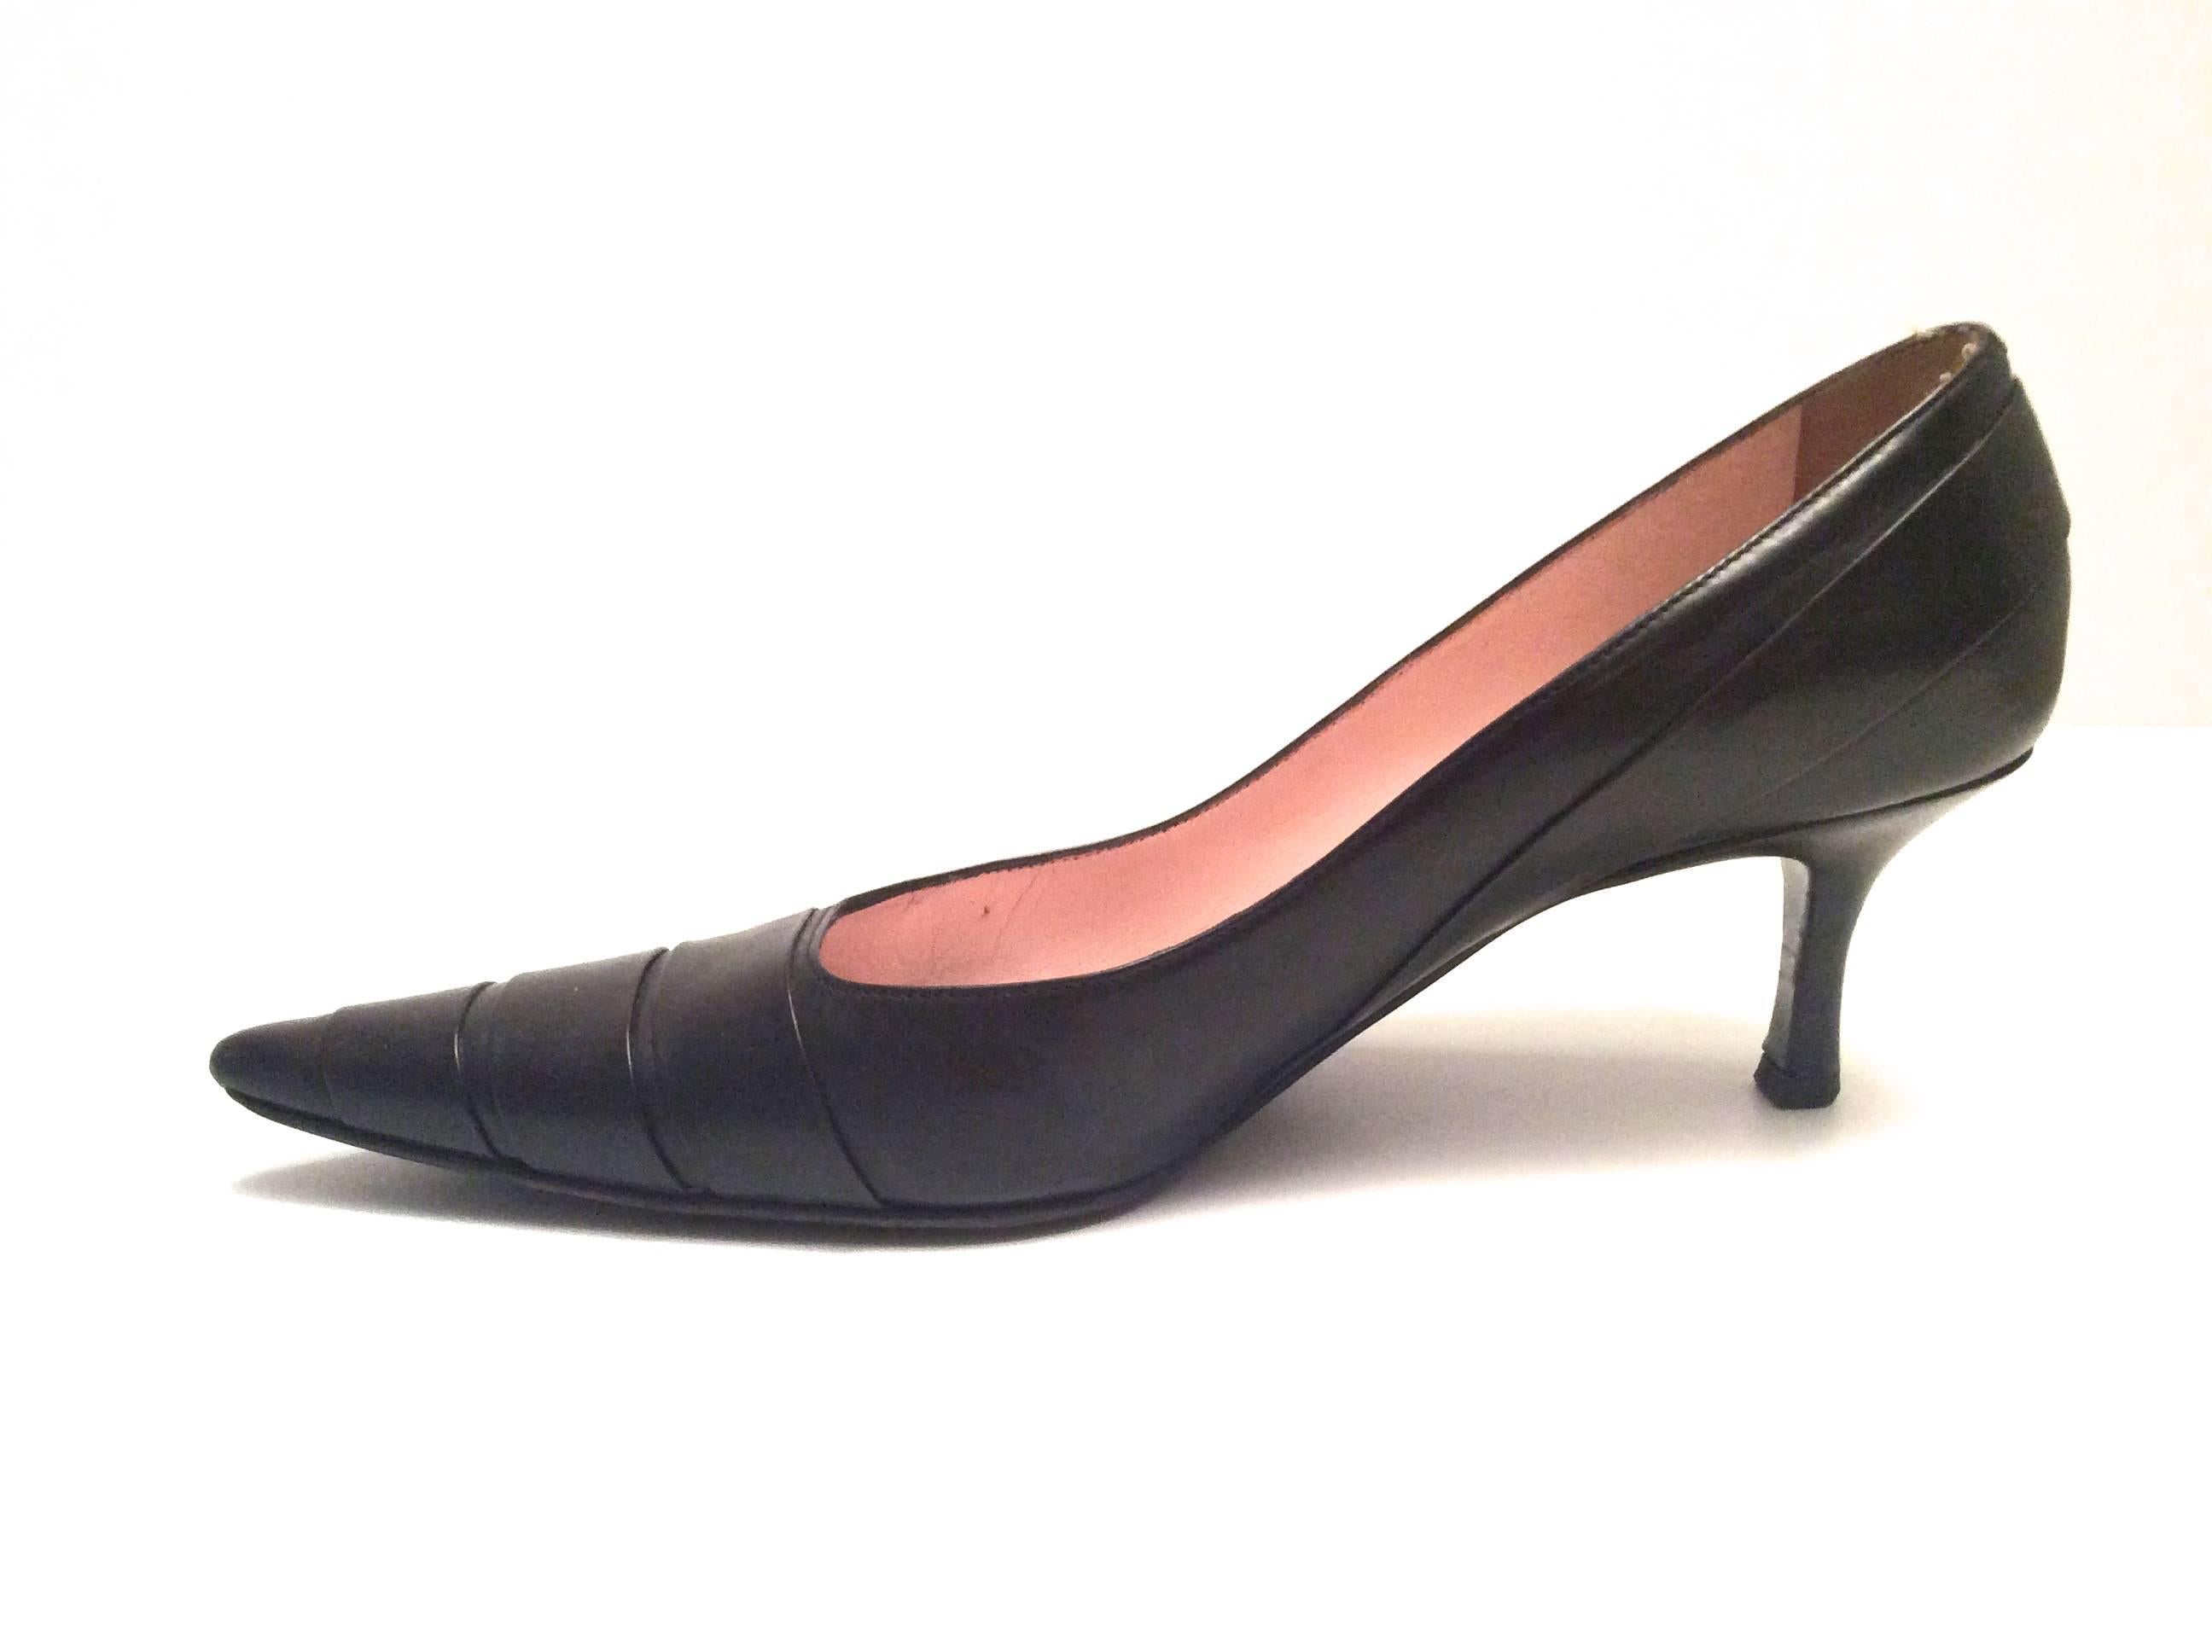 Chanel Dark Brown Leather Pumps - Size 38 For Sale 2